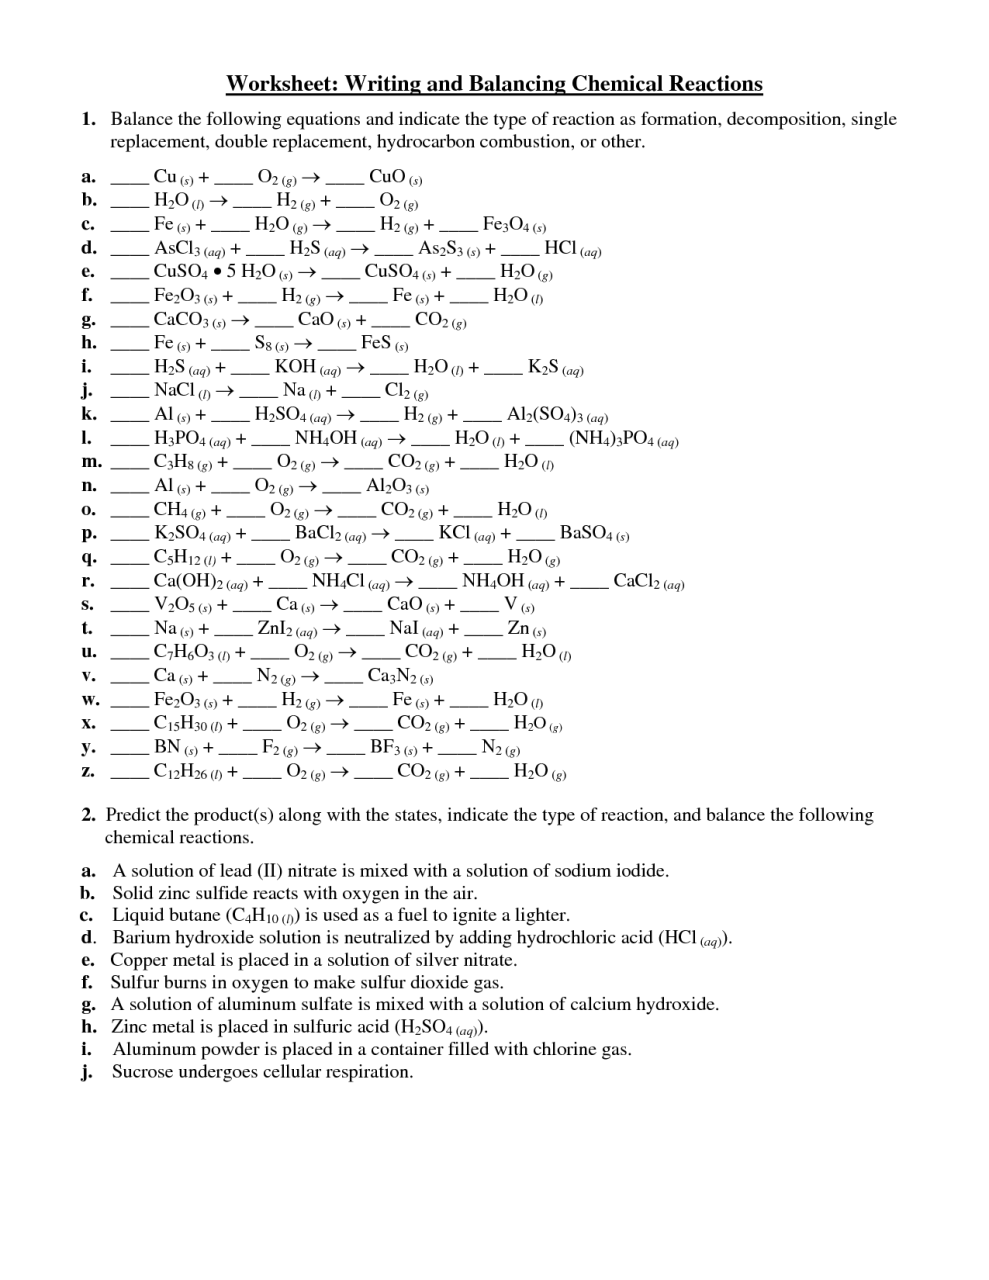 14 Best Images of Balancing Chemical Equations Worksheet Answer Key 1